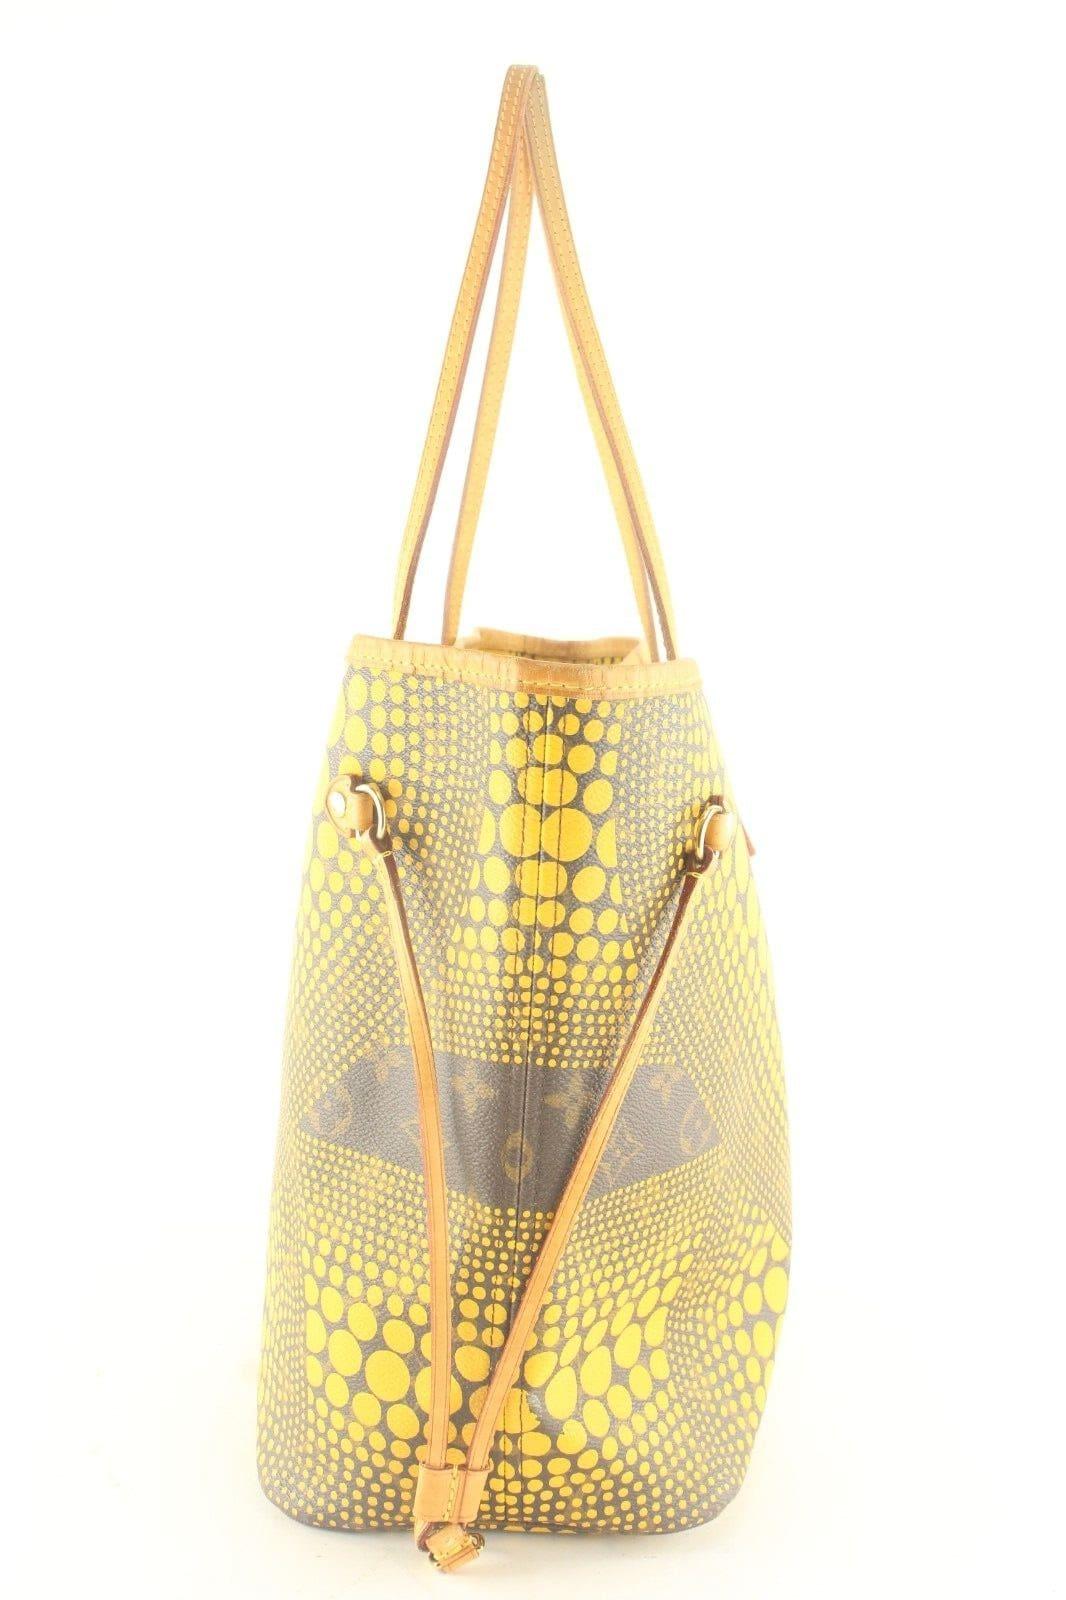 LOUIS VUITTON Monogram Yayoi Kusama Waves Neverfull MM Yellow Tote Bag 3LK1113K In Good Condition For Sale In Dix hills, NY